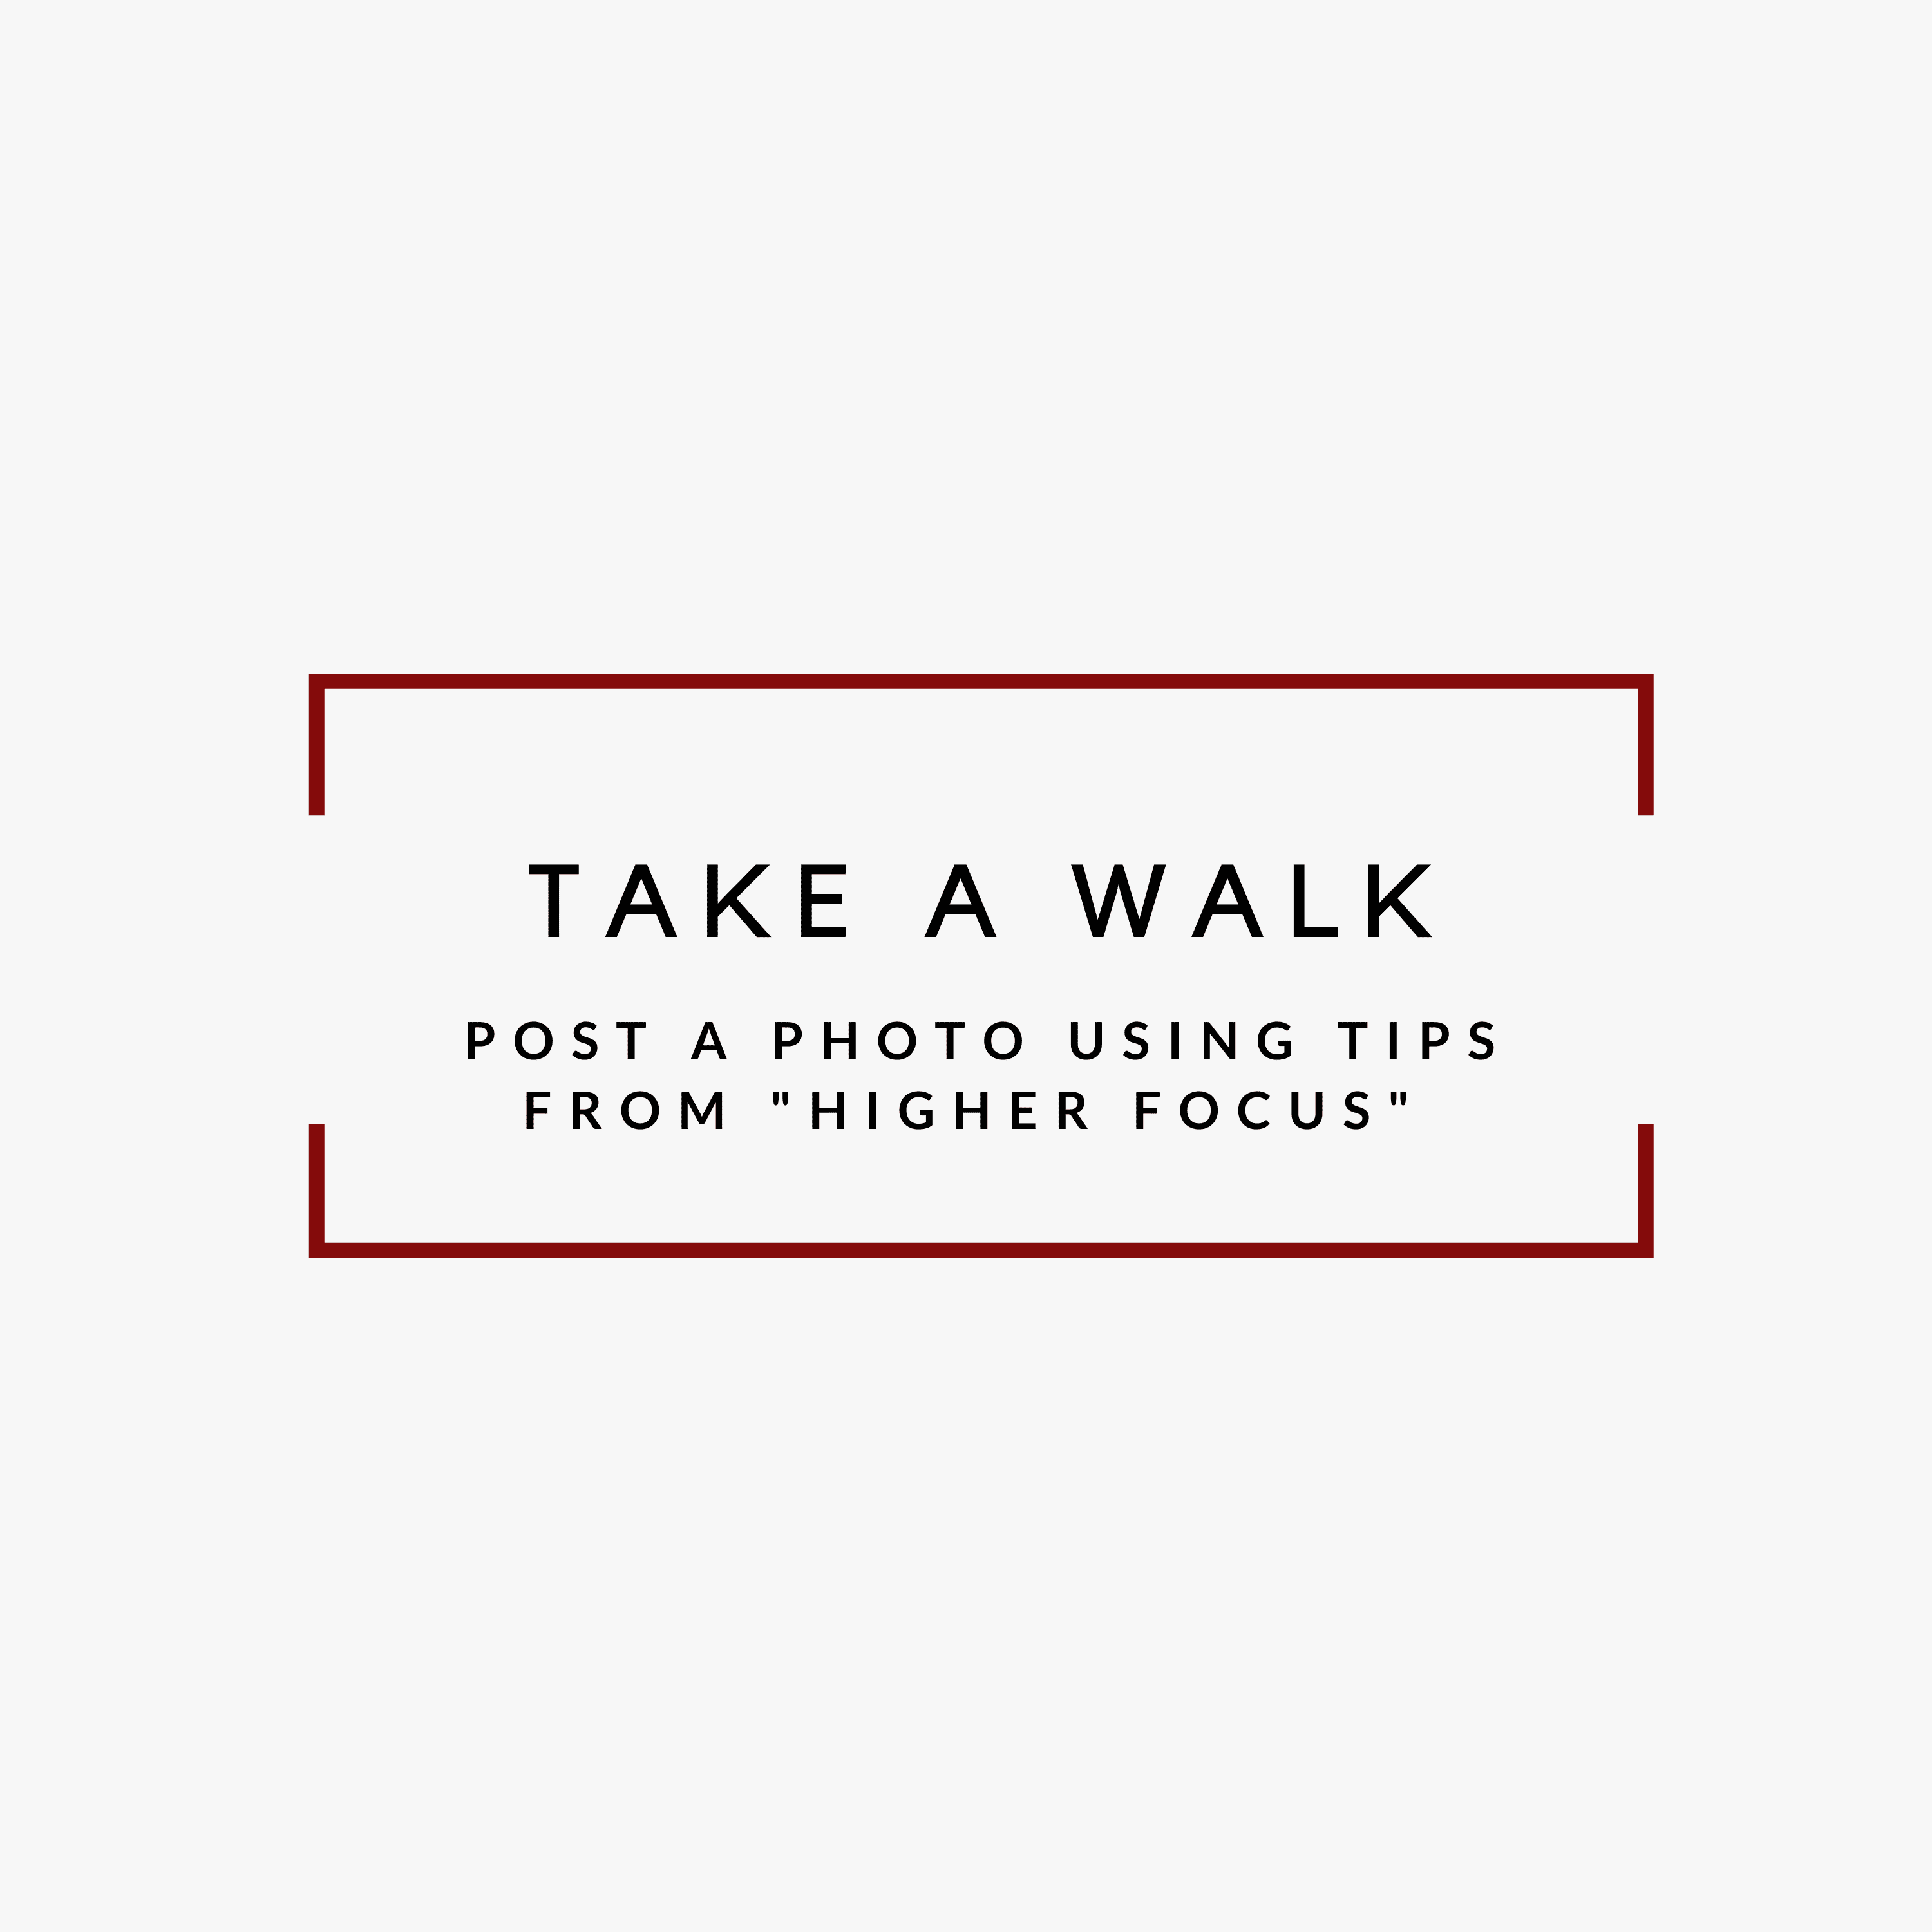 It’s a great time to get out and go for a walk! Exercise is a great way to stay positive and boost your energy. Take your phone with you and practice your photography too!